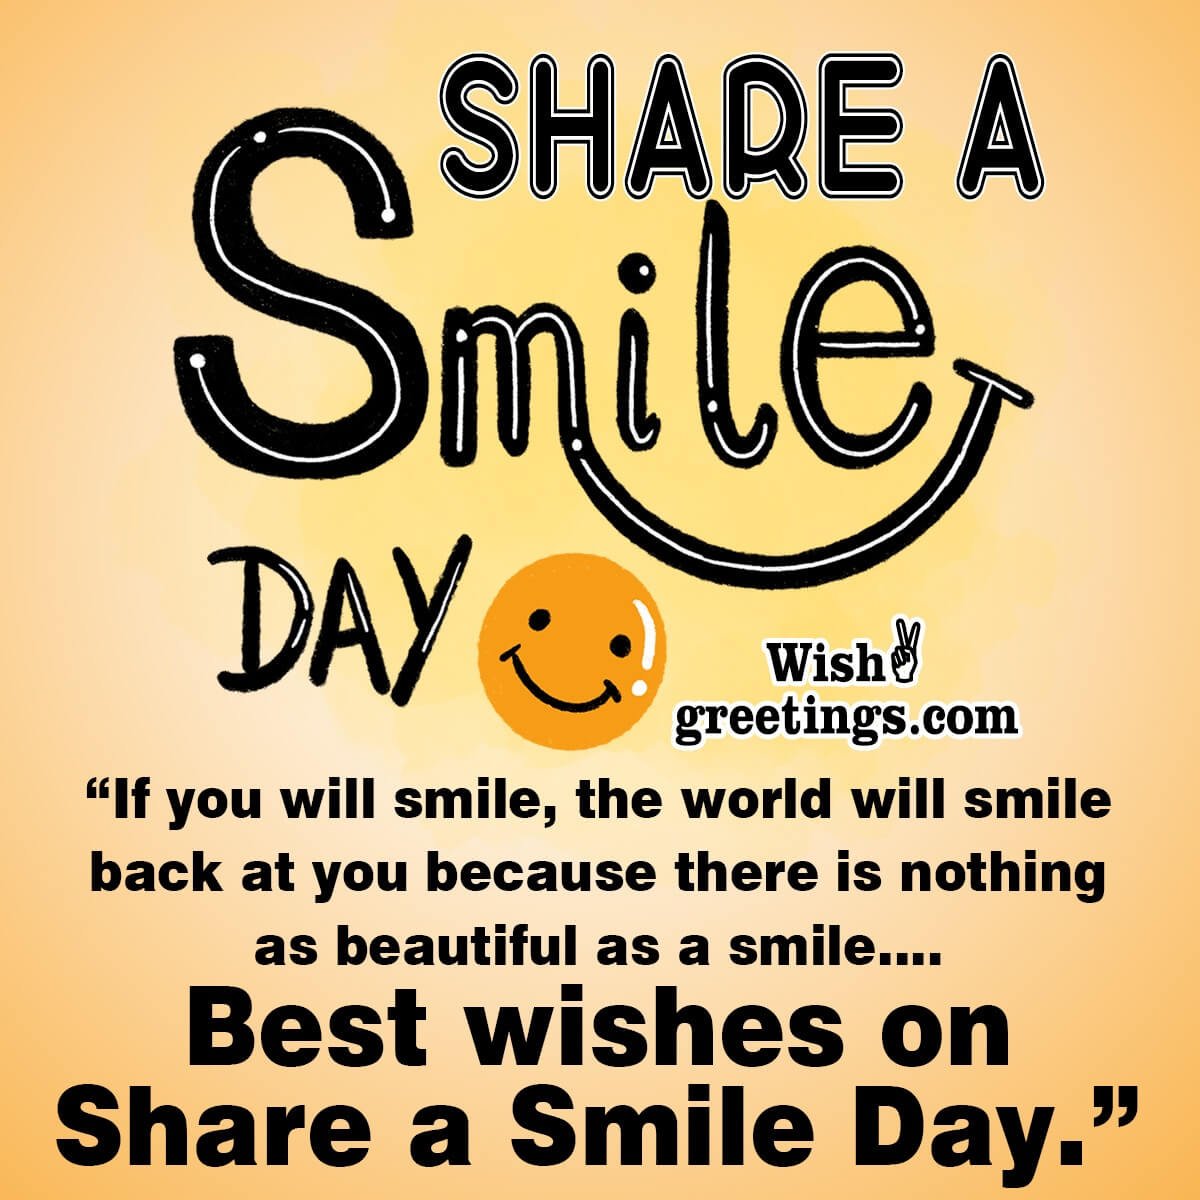 Share a Smile Day Messages Wish Greetings